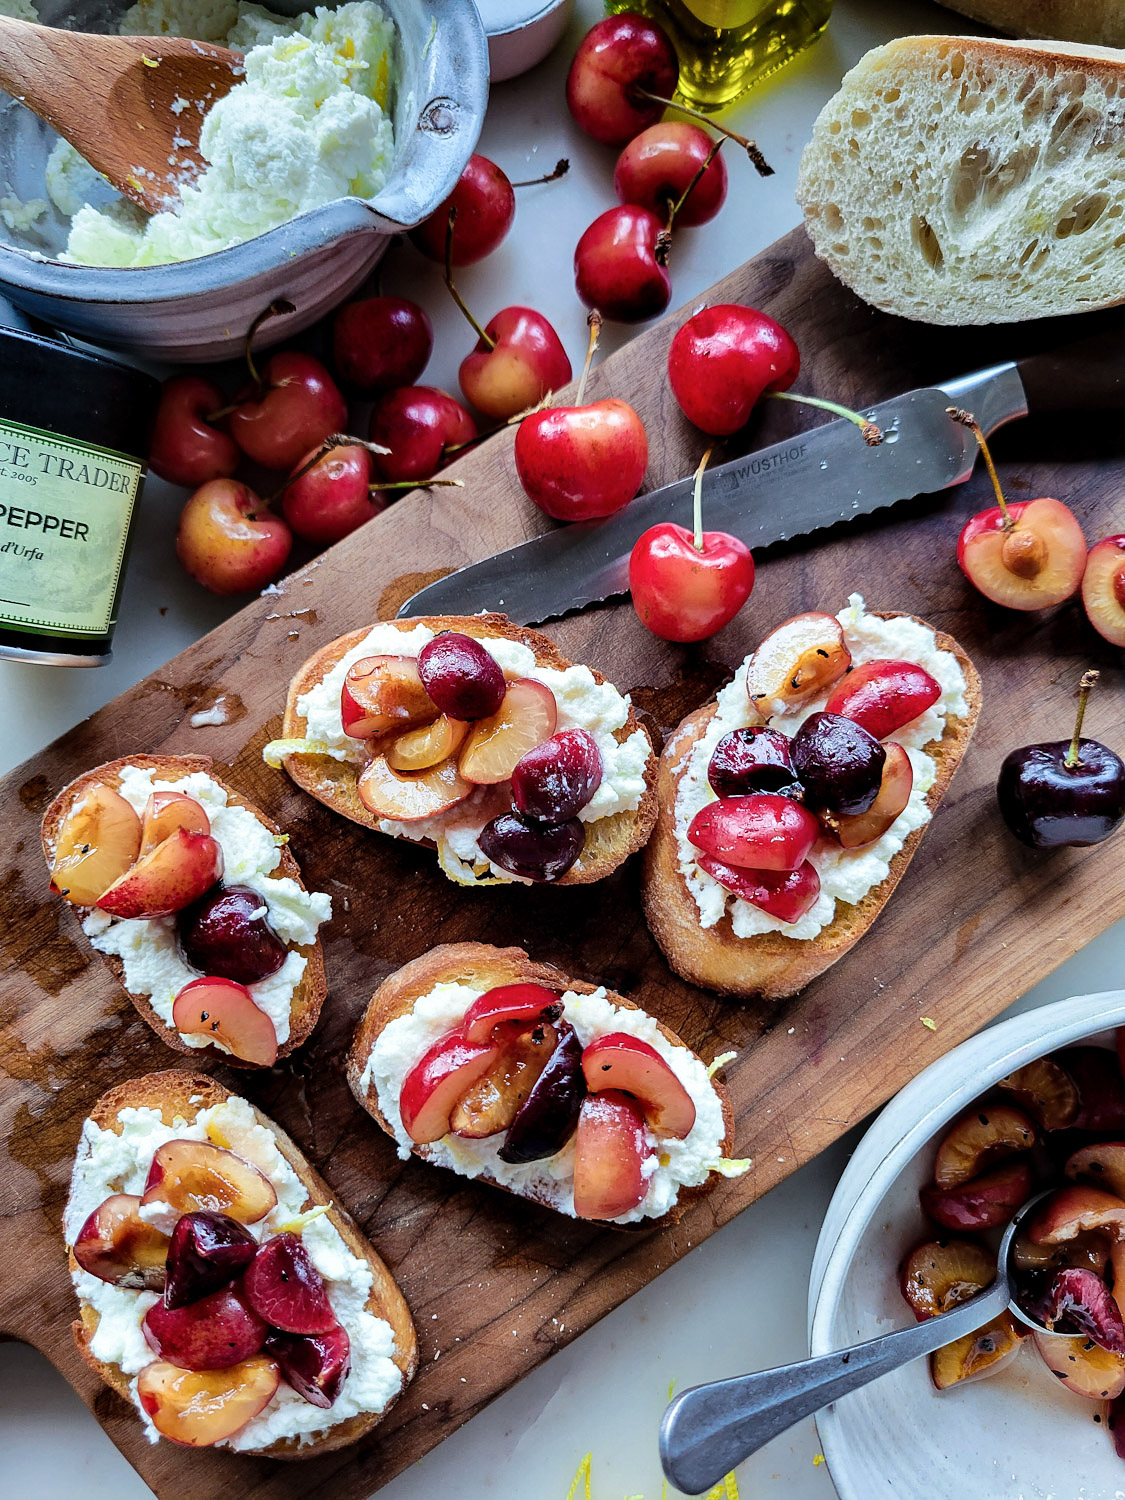 a wooden cutting board with toasted crostini slices spread with lemon ricotta cheese and topped with chopped macerated cherries